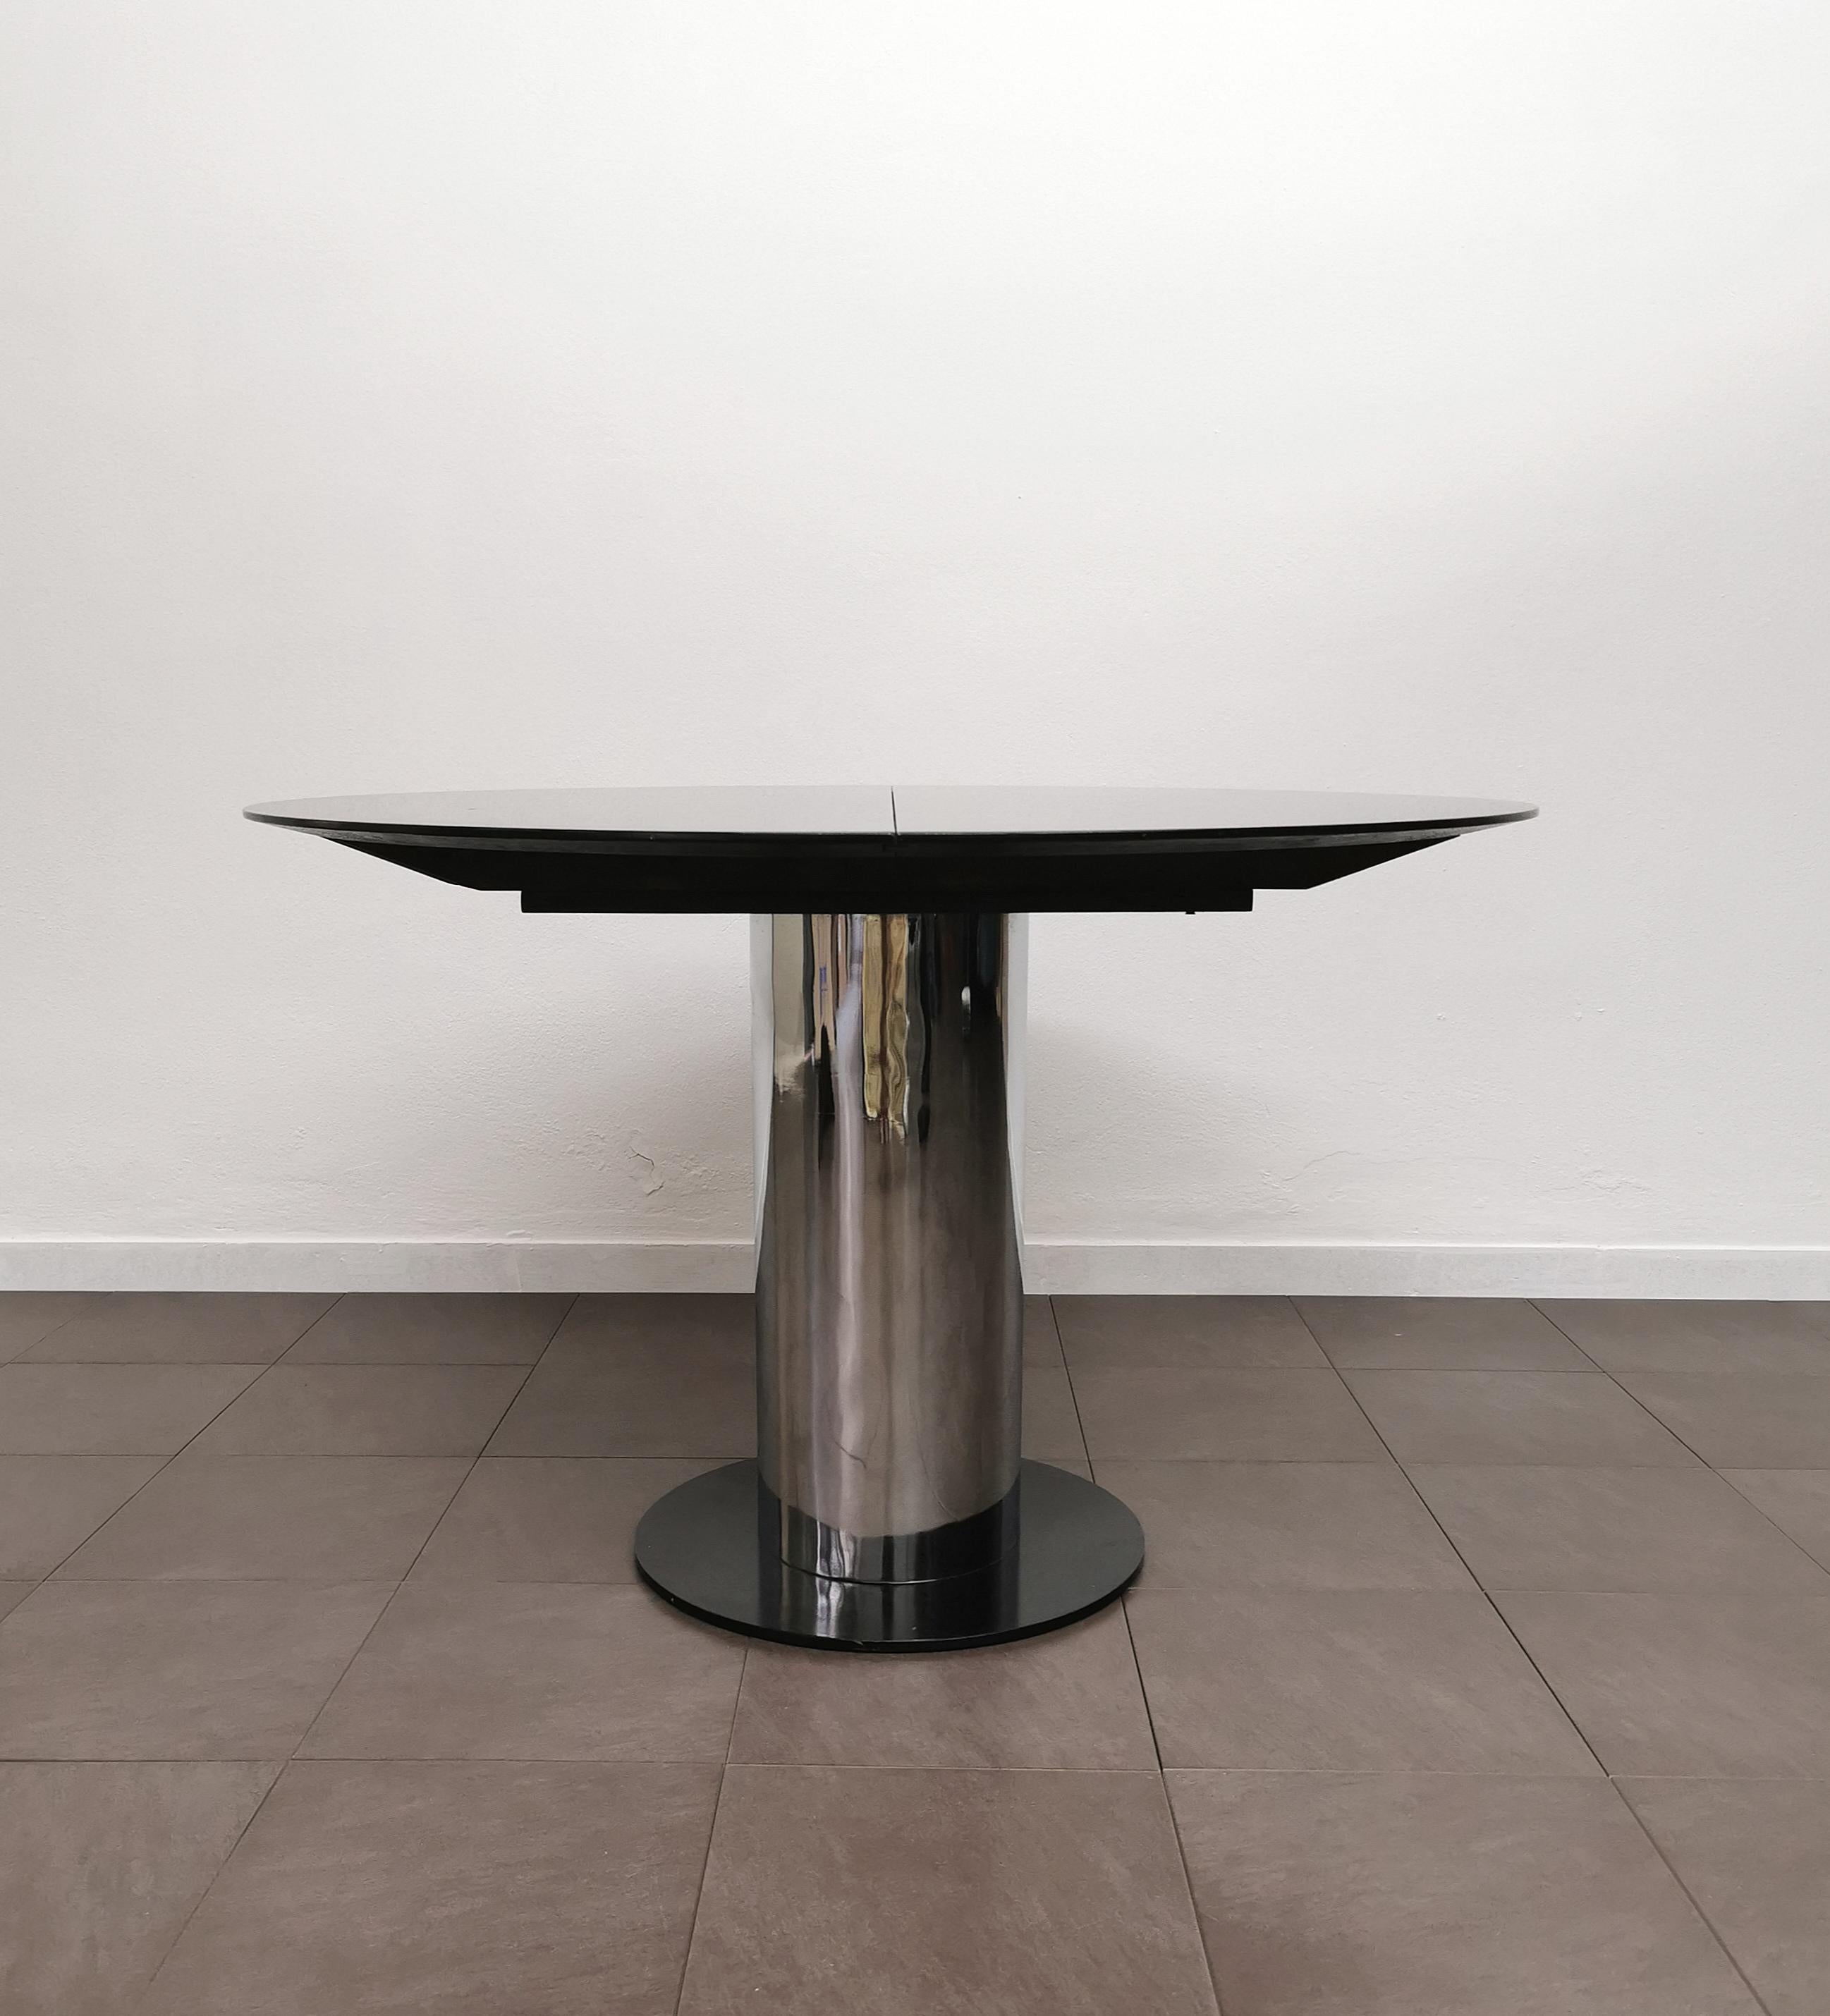 Dining table made in Italy in the 70'. The round-shaped table was made with a black enamelled wooden top with an extendable mechanism. Central support in chromed metal with circular black enamelled metal base.
I also want to emphasize the fine and